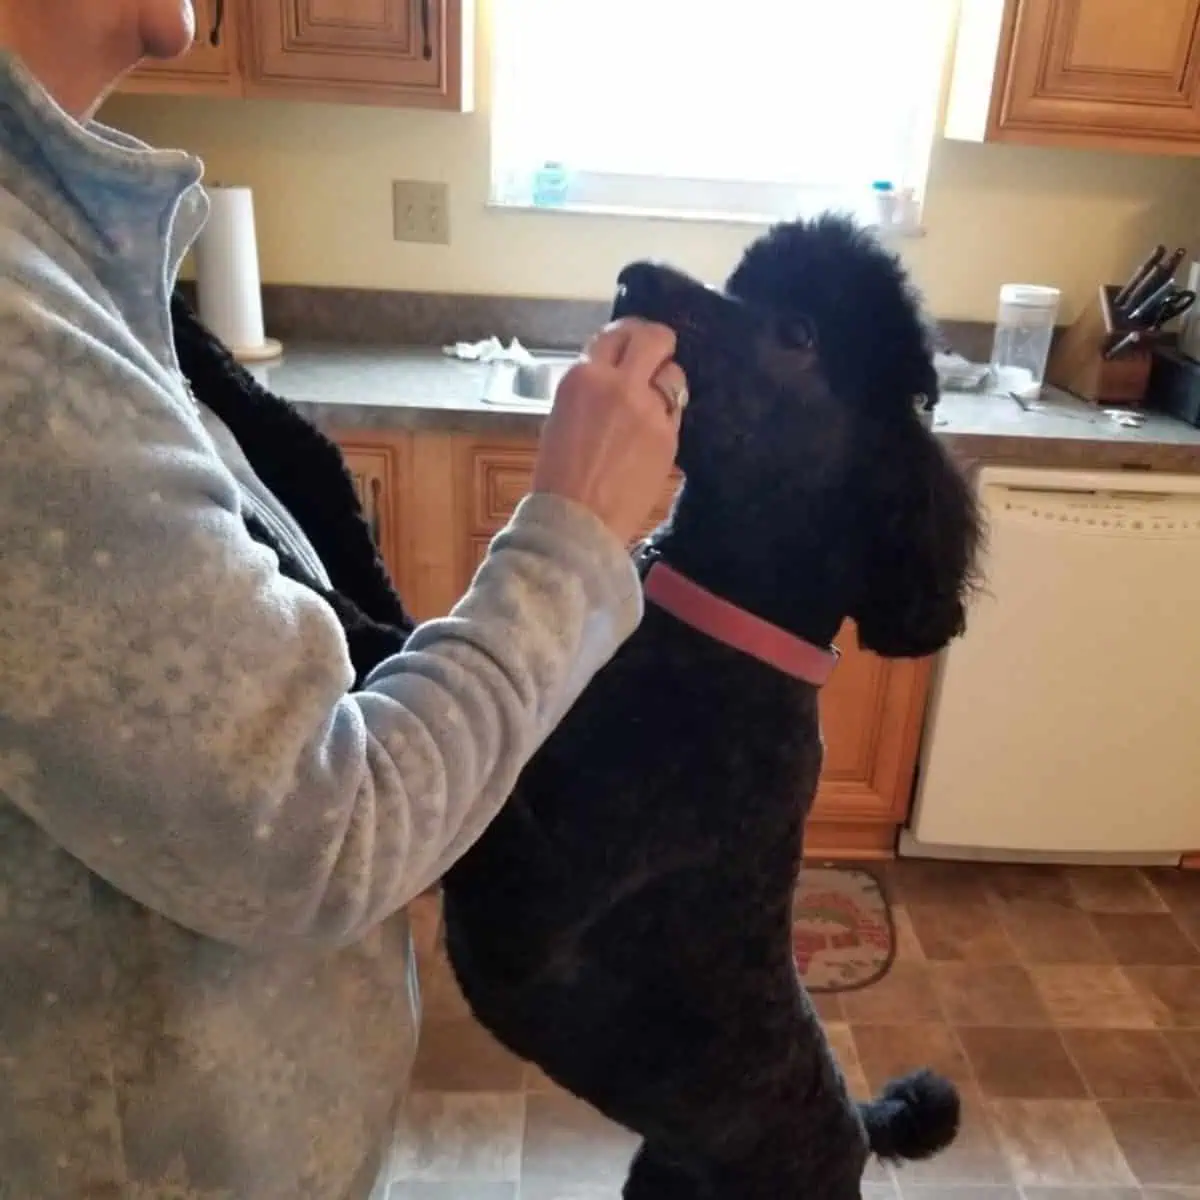 Poodle rewarded with treats